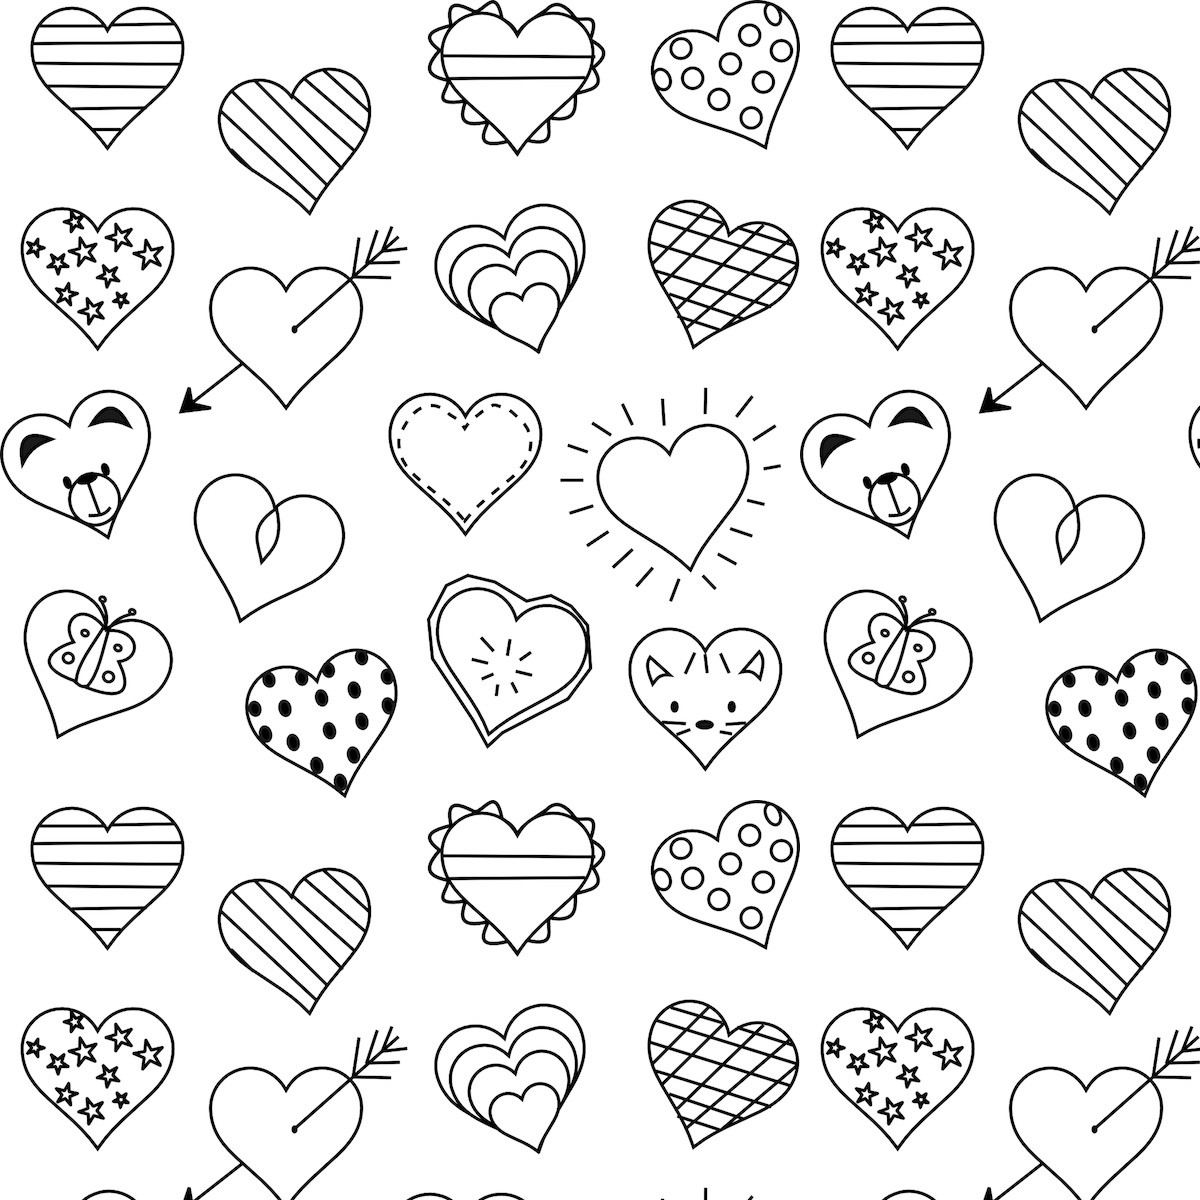 Printable Heart Coloring Pages
 Free printable heart coloring page ausdruckbare